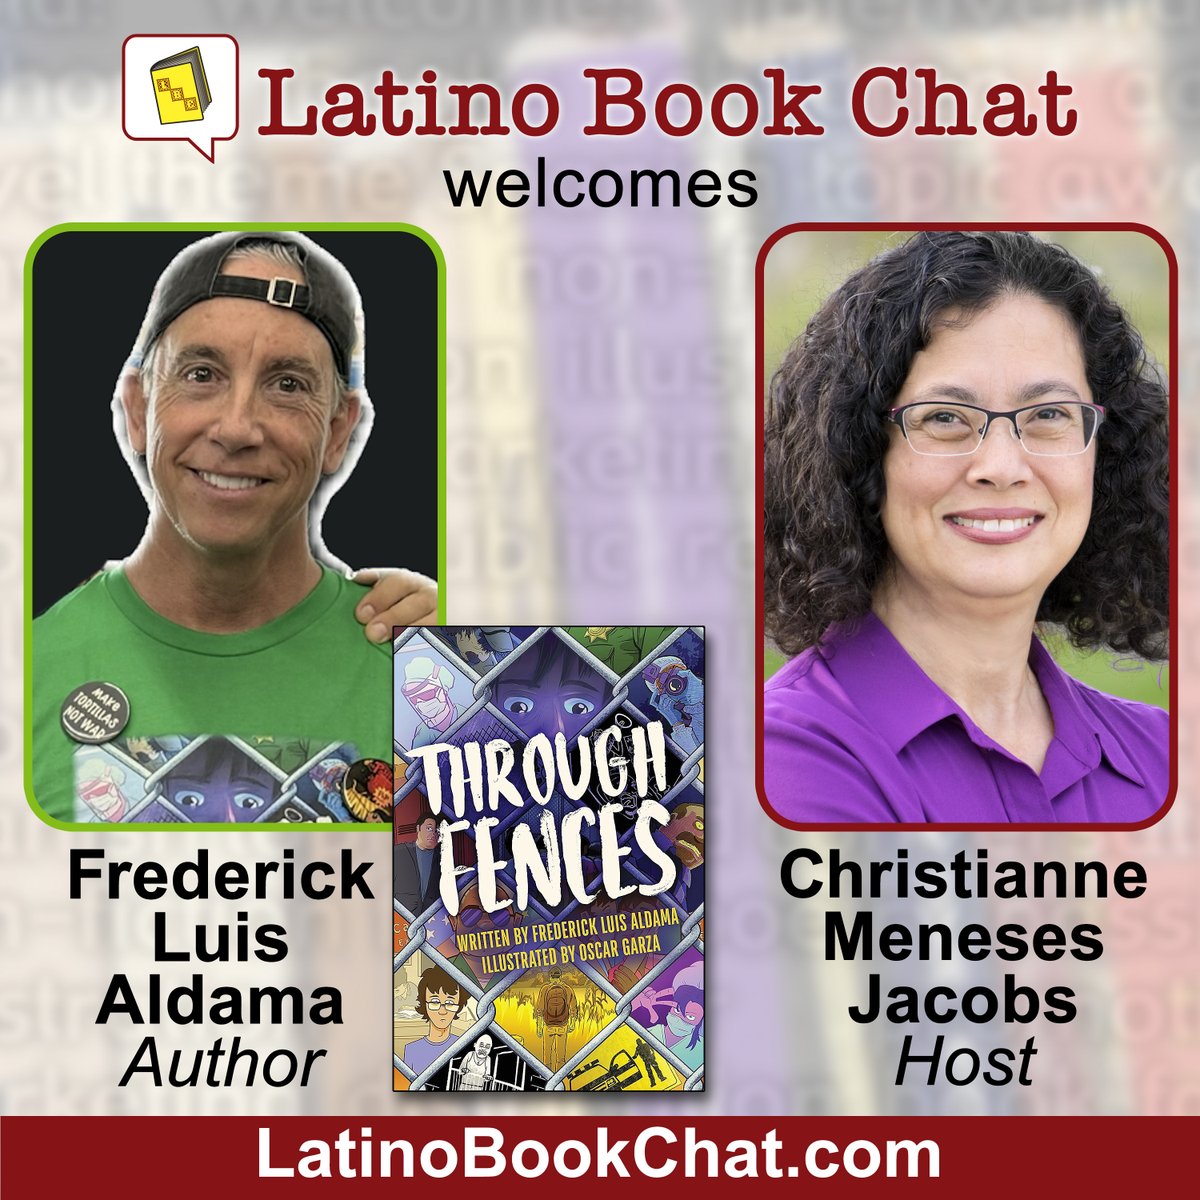 Dive into the powerful world of the US–Mexico borderlands with @ProfessorLatinx graphic novel “Through Fences”. Tune in for gripping stories that shed light on the perils of living on the border while brown. Listen at LatinoBookChat.com #latinxbooks #borderlands #BorderLife